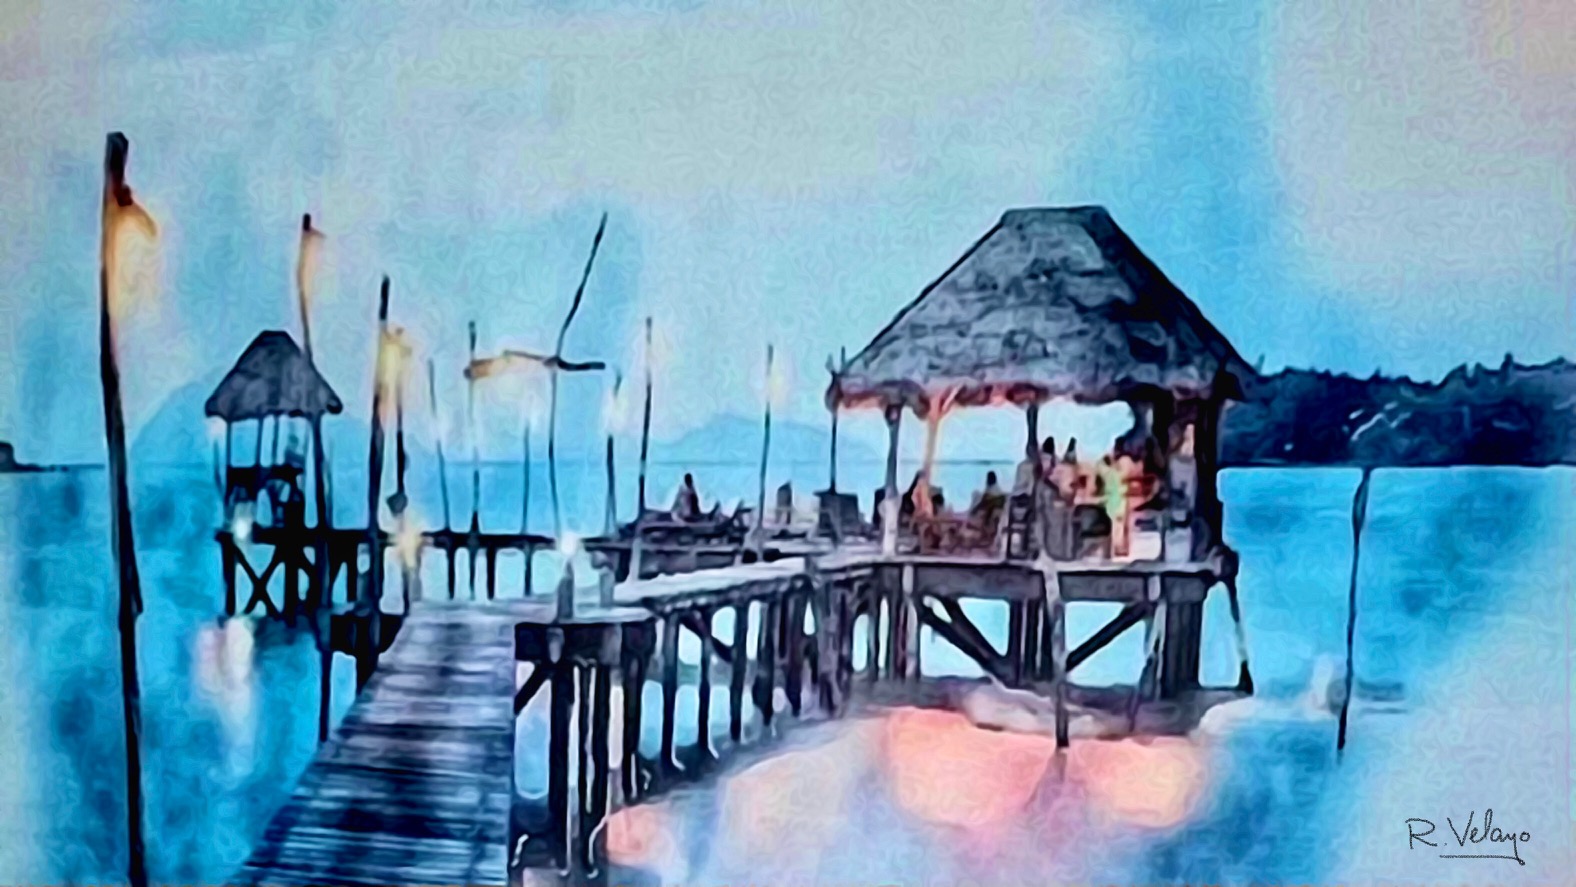 "GAZEBO OVER THE WATER AT DUSK" [Created: 2/19/2022]